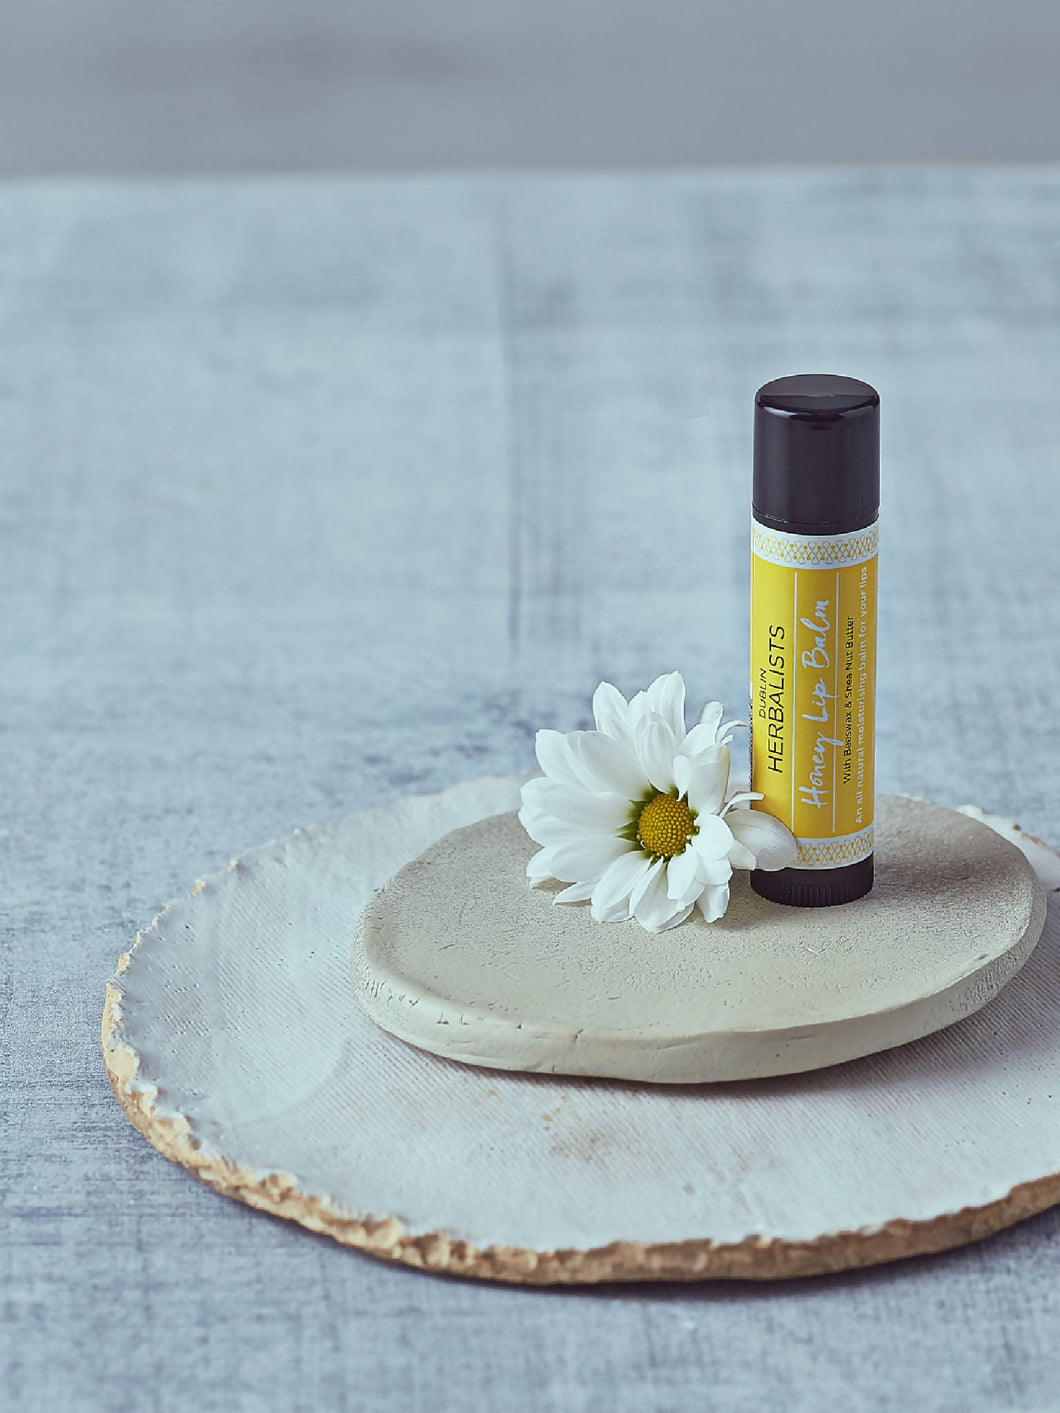 Honey Lip Balm- With Beeswax and Shea Nut Butter